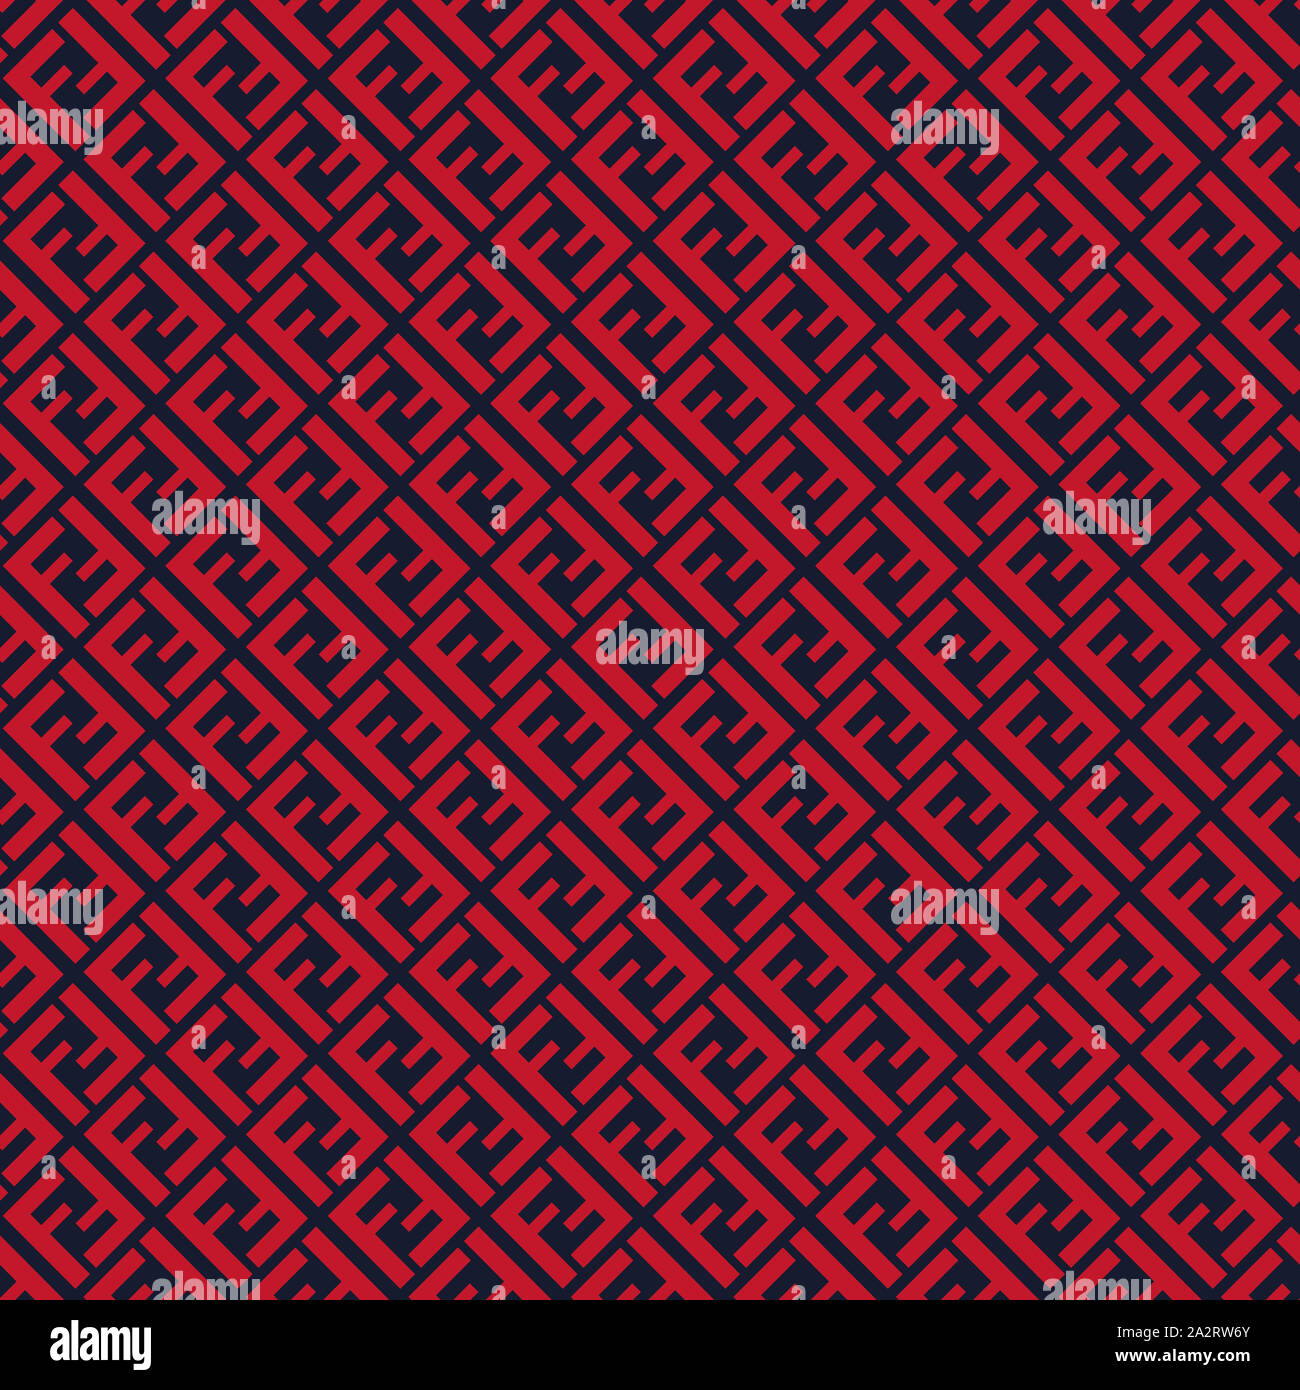 Seamless pattern with fendi logo. Design for fabric textile Ready for prints Photo - Alamy